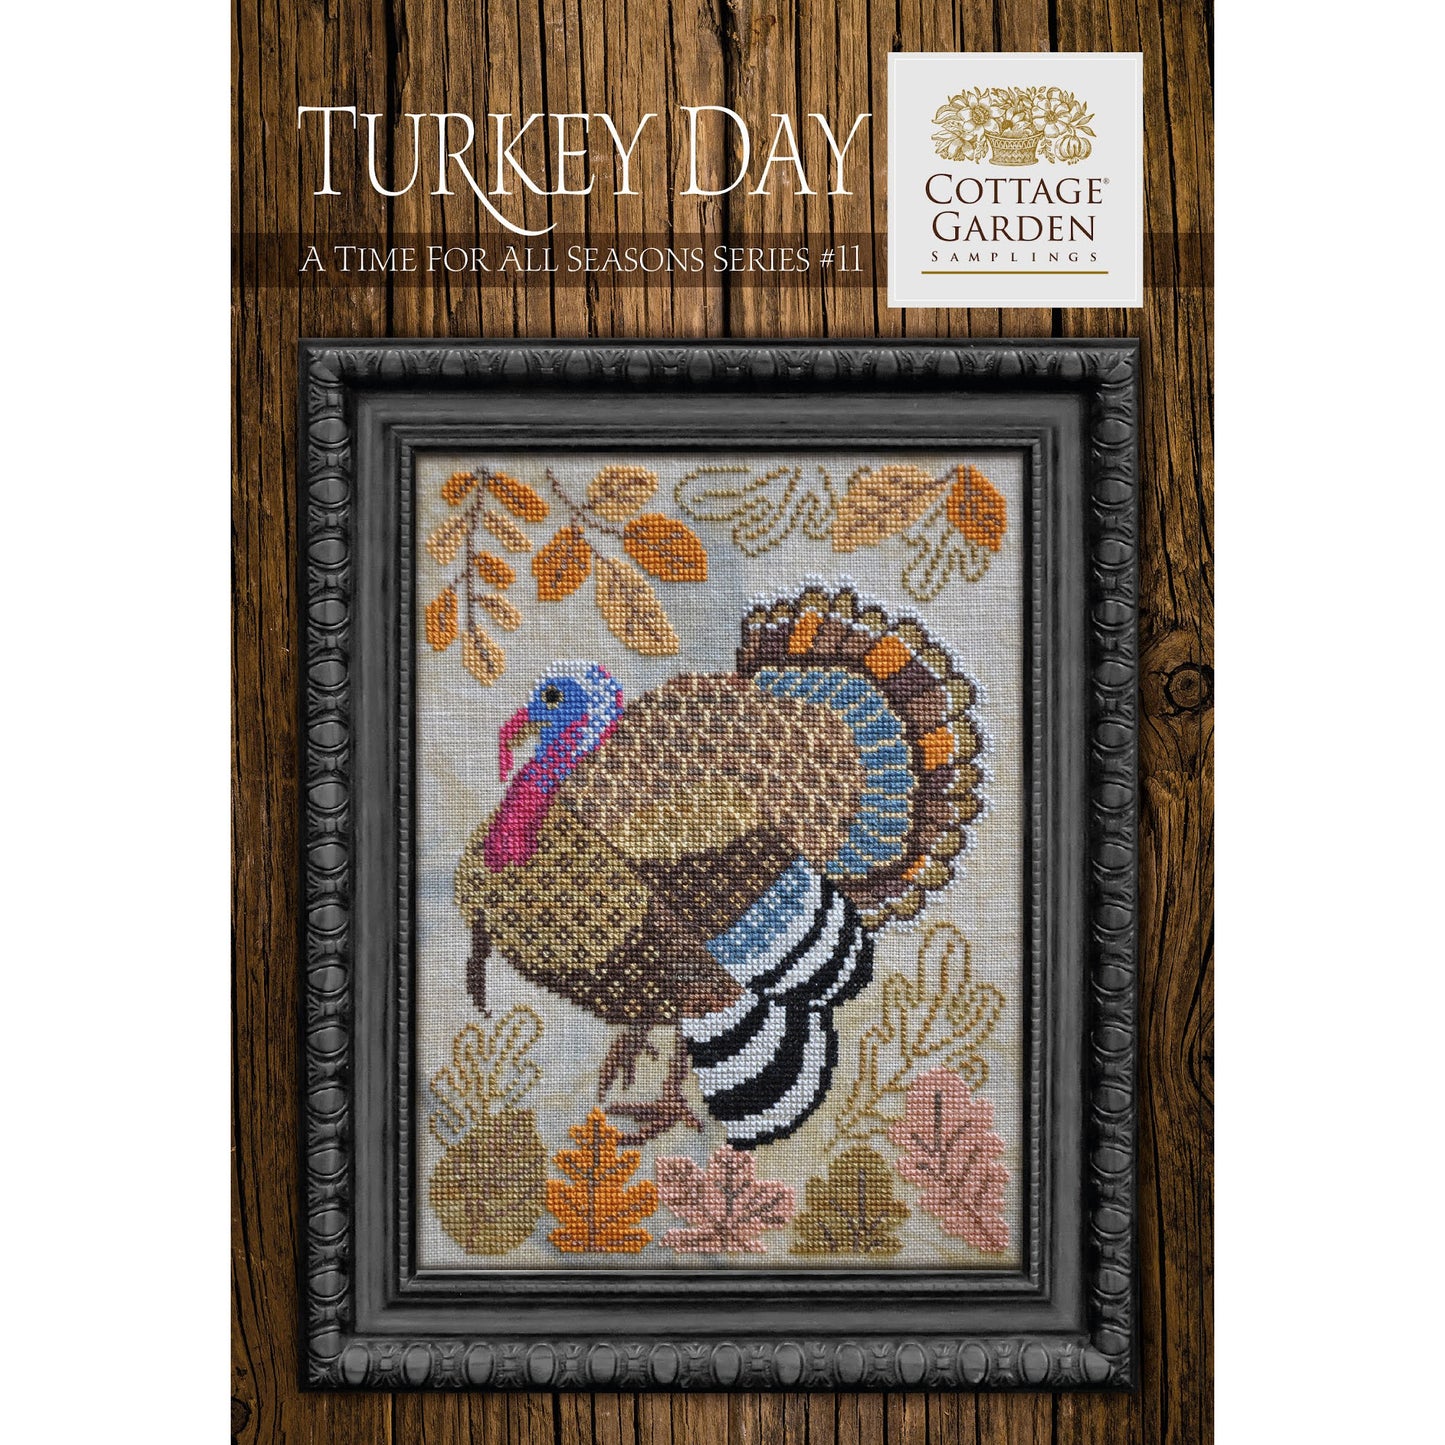 Cottage Garden Samplings ~ A Time For All Seasons ~ Turkey Day Pattern 11